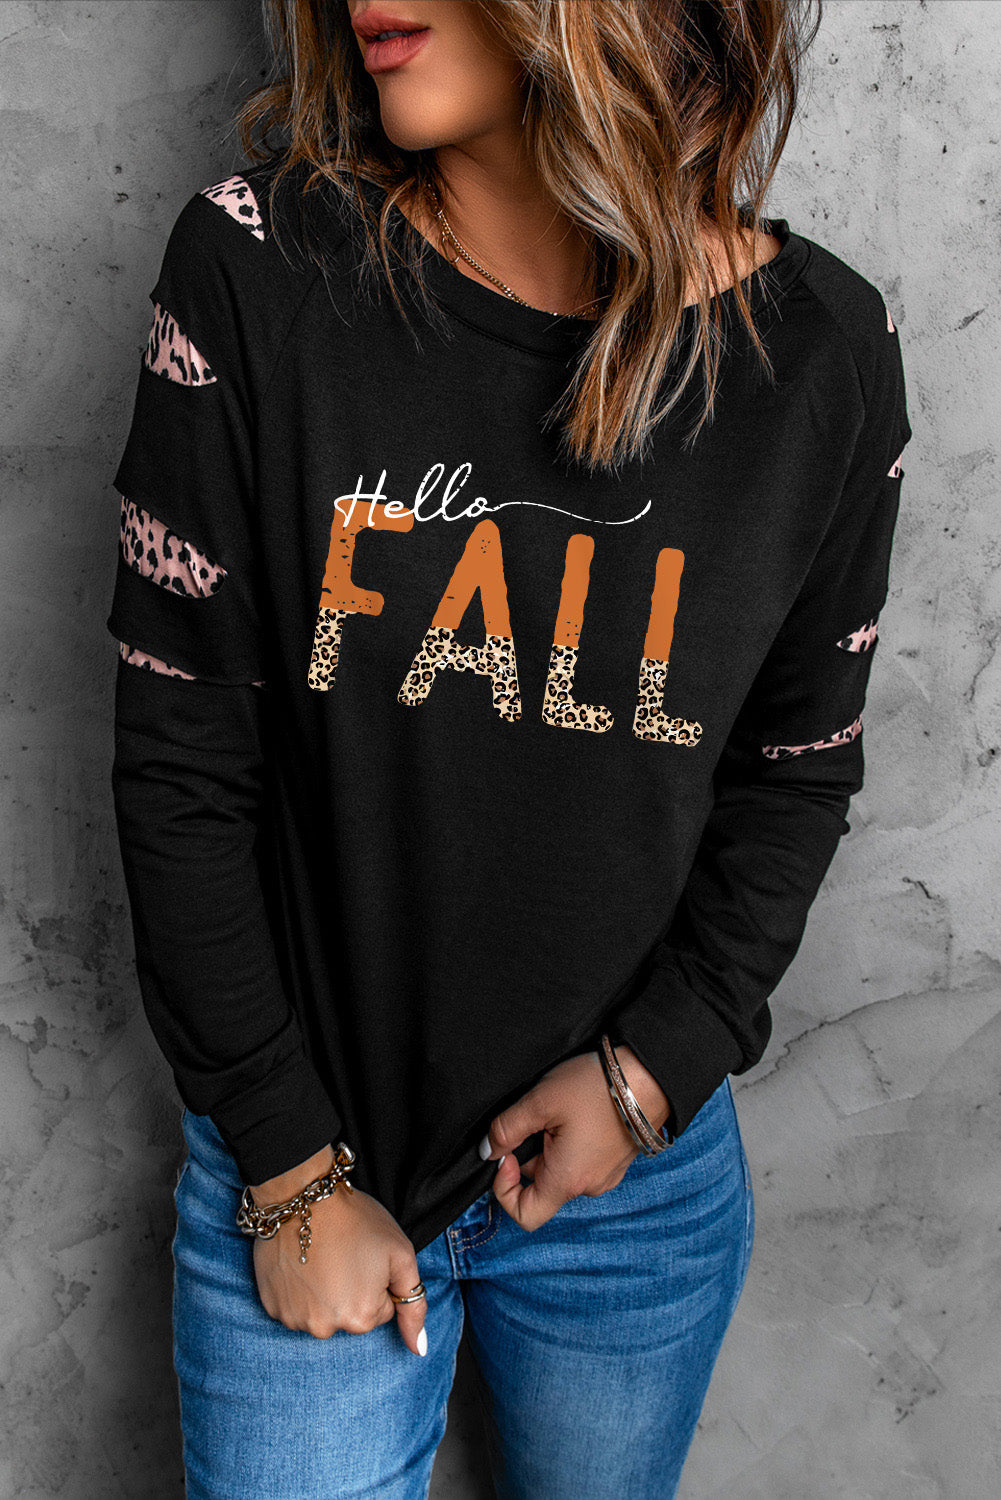 Double Take Leopard Long Sleeve Round Neck HELLO FALL Graphic Sweatshirt